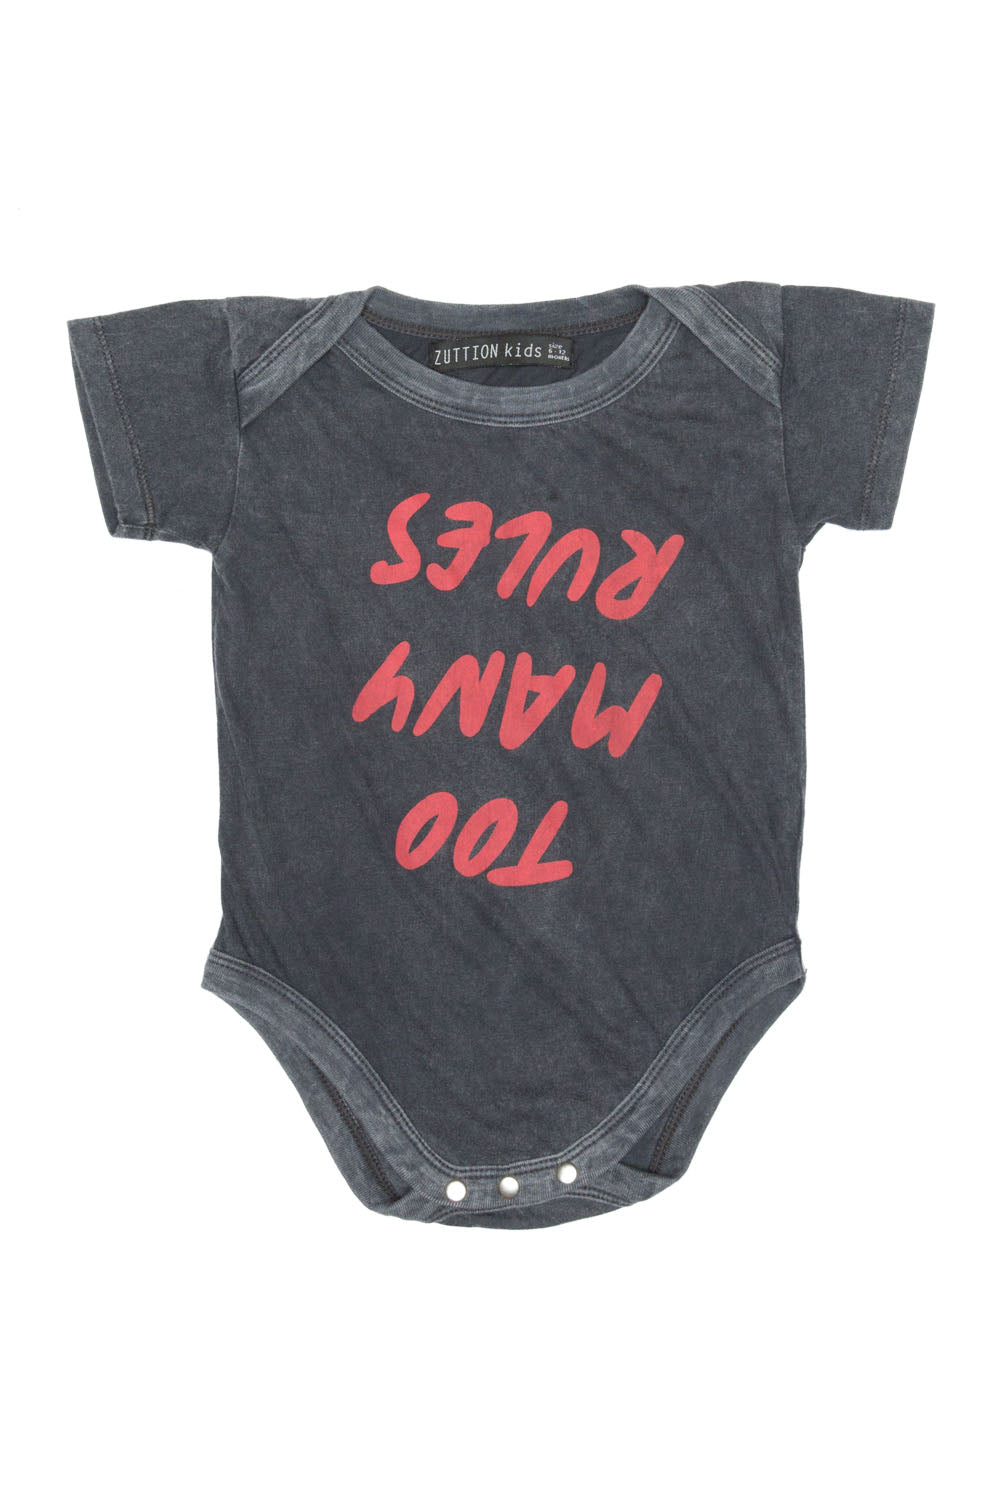 TOO MANY RULES ONESIE CHARCOAL - Zuttion